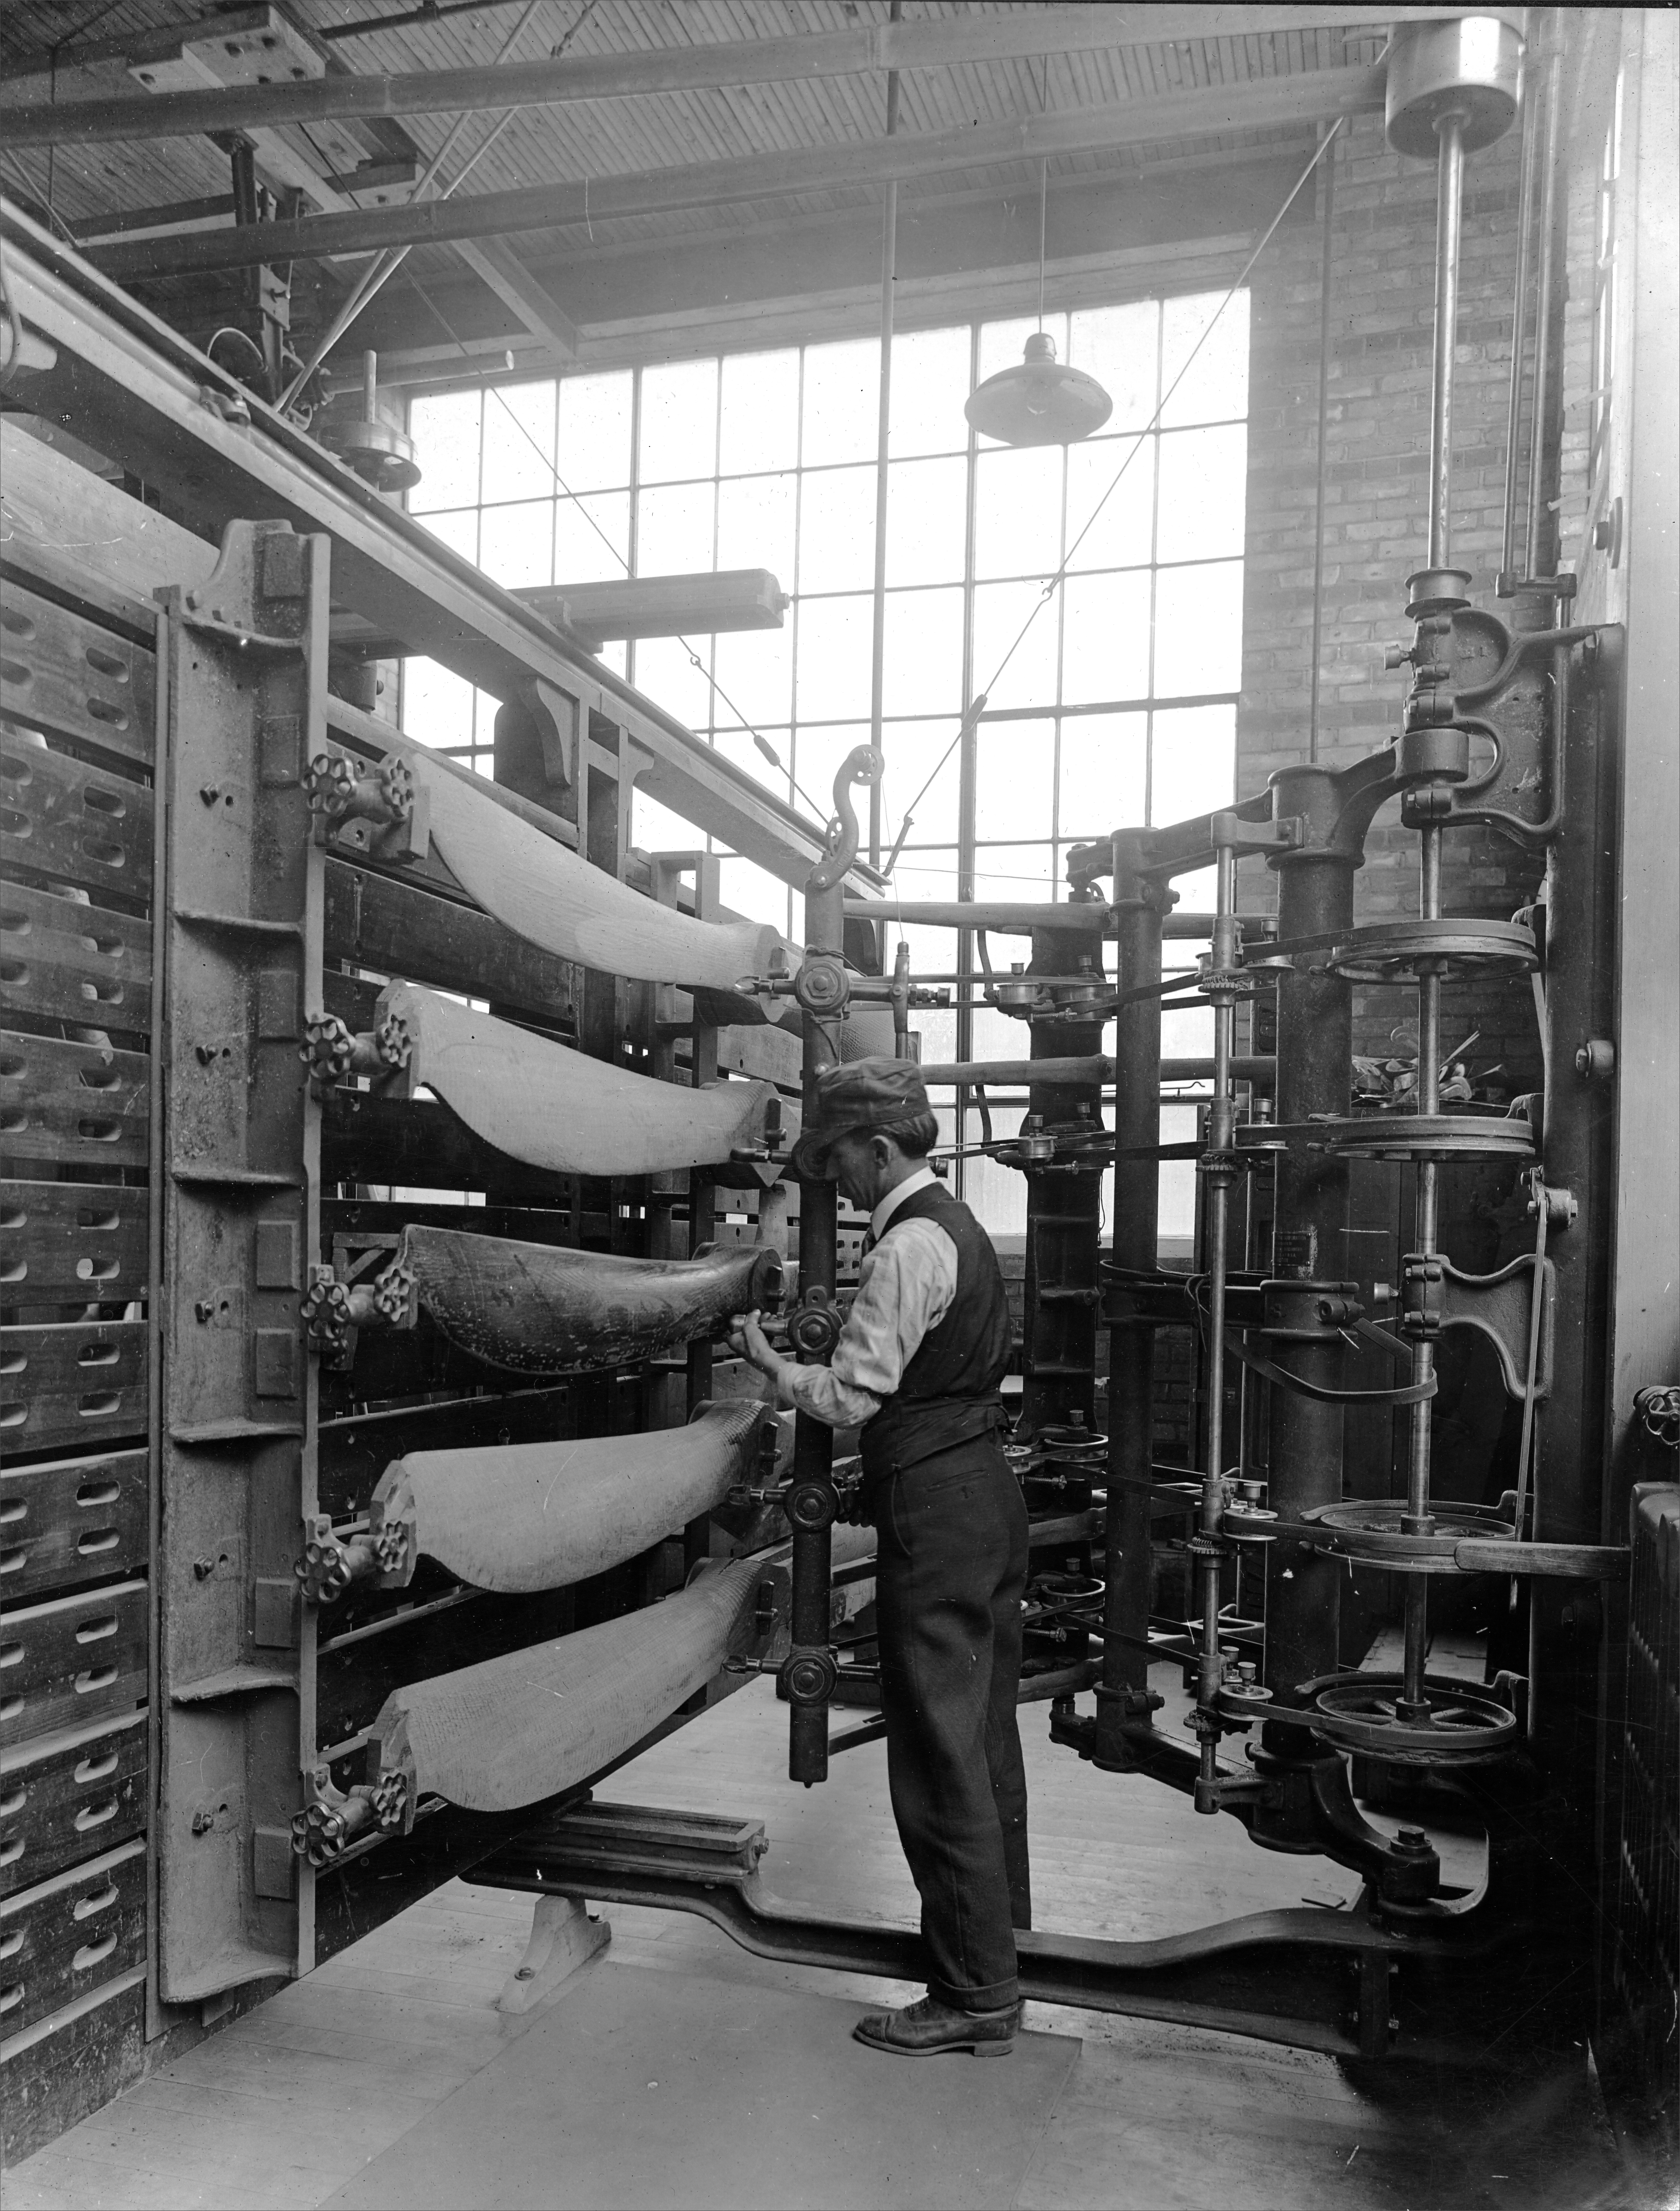 Making JN-4 propellers on a specialized machine. This tool could carve four propellers in less than 30 minutes, 1918.